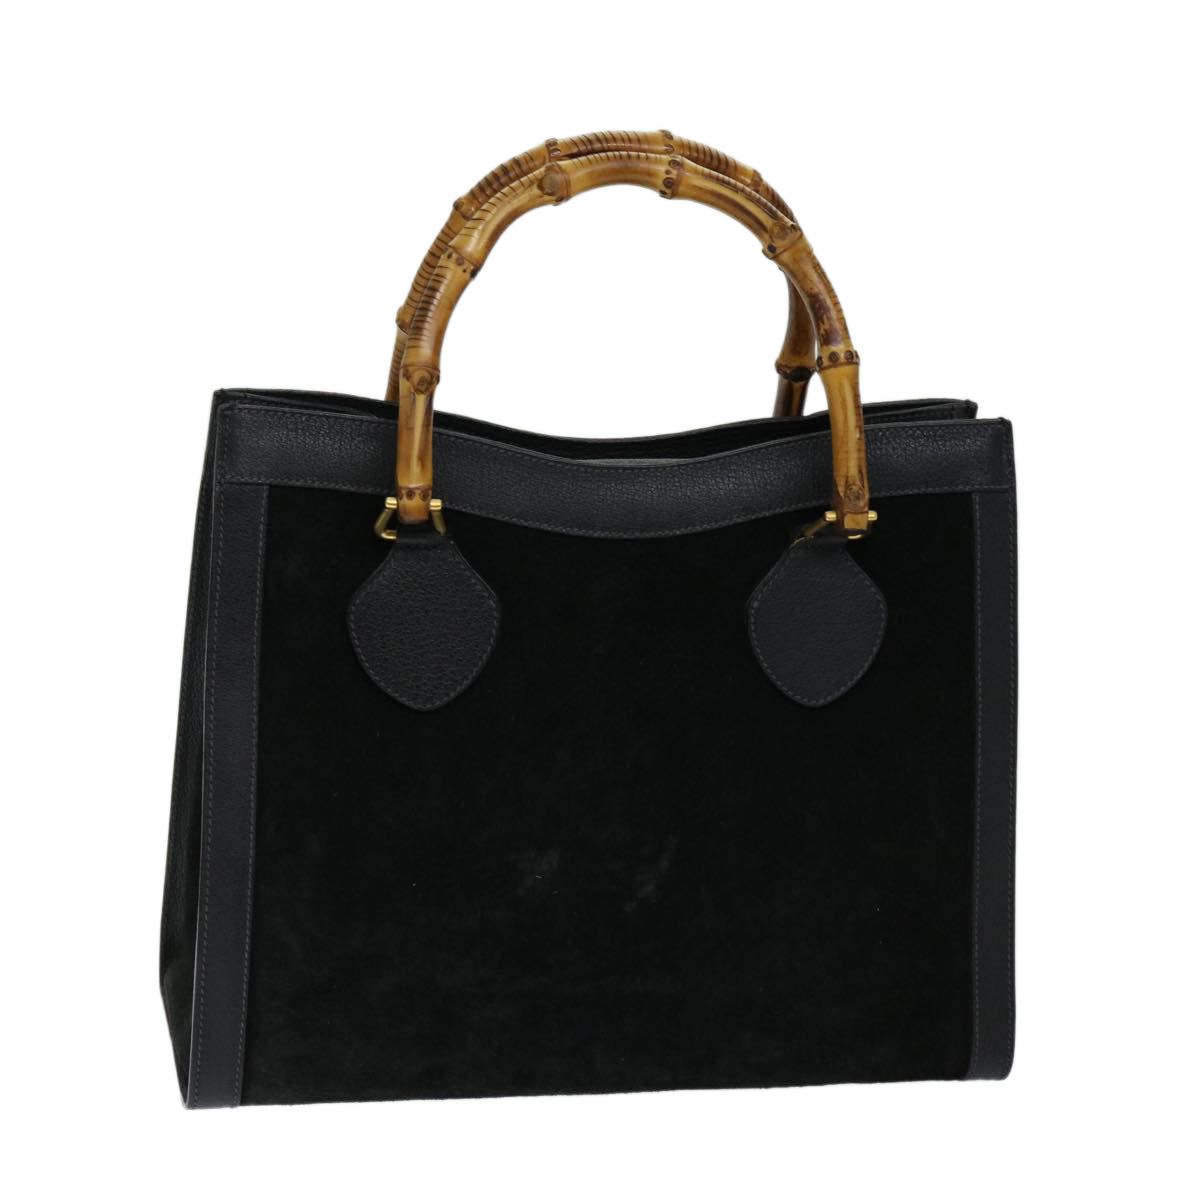 GUCCI Bamboo Tote Bag Suede Black 002 1095 0260 Auth 69422